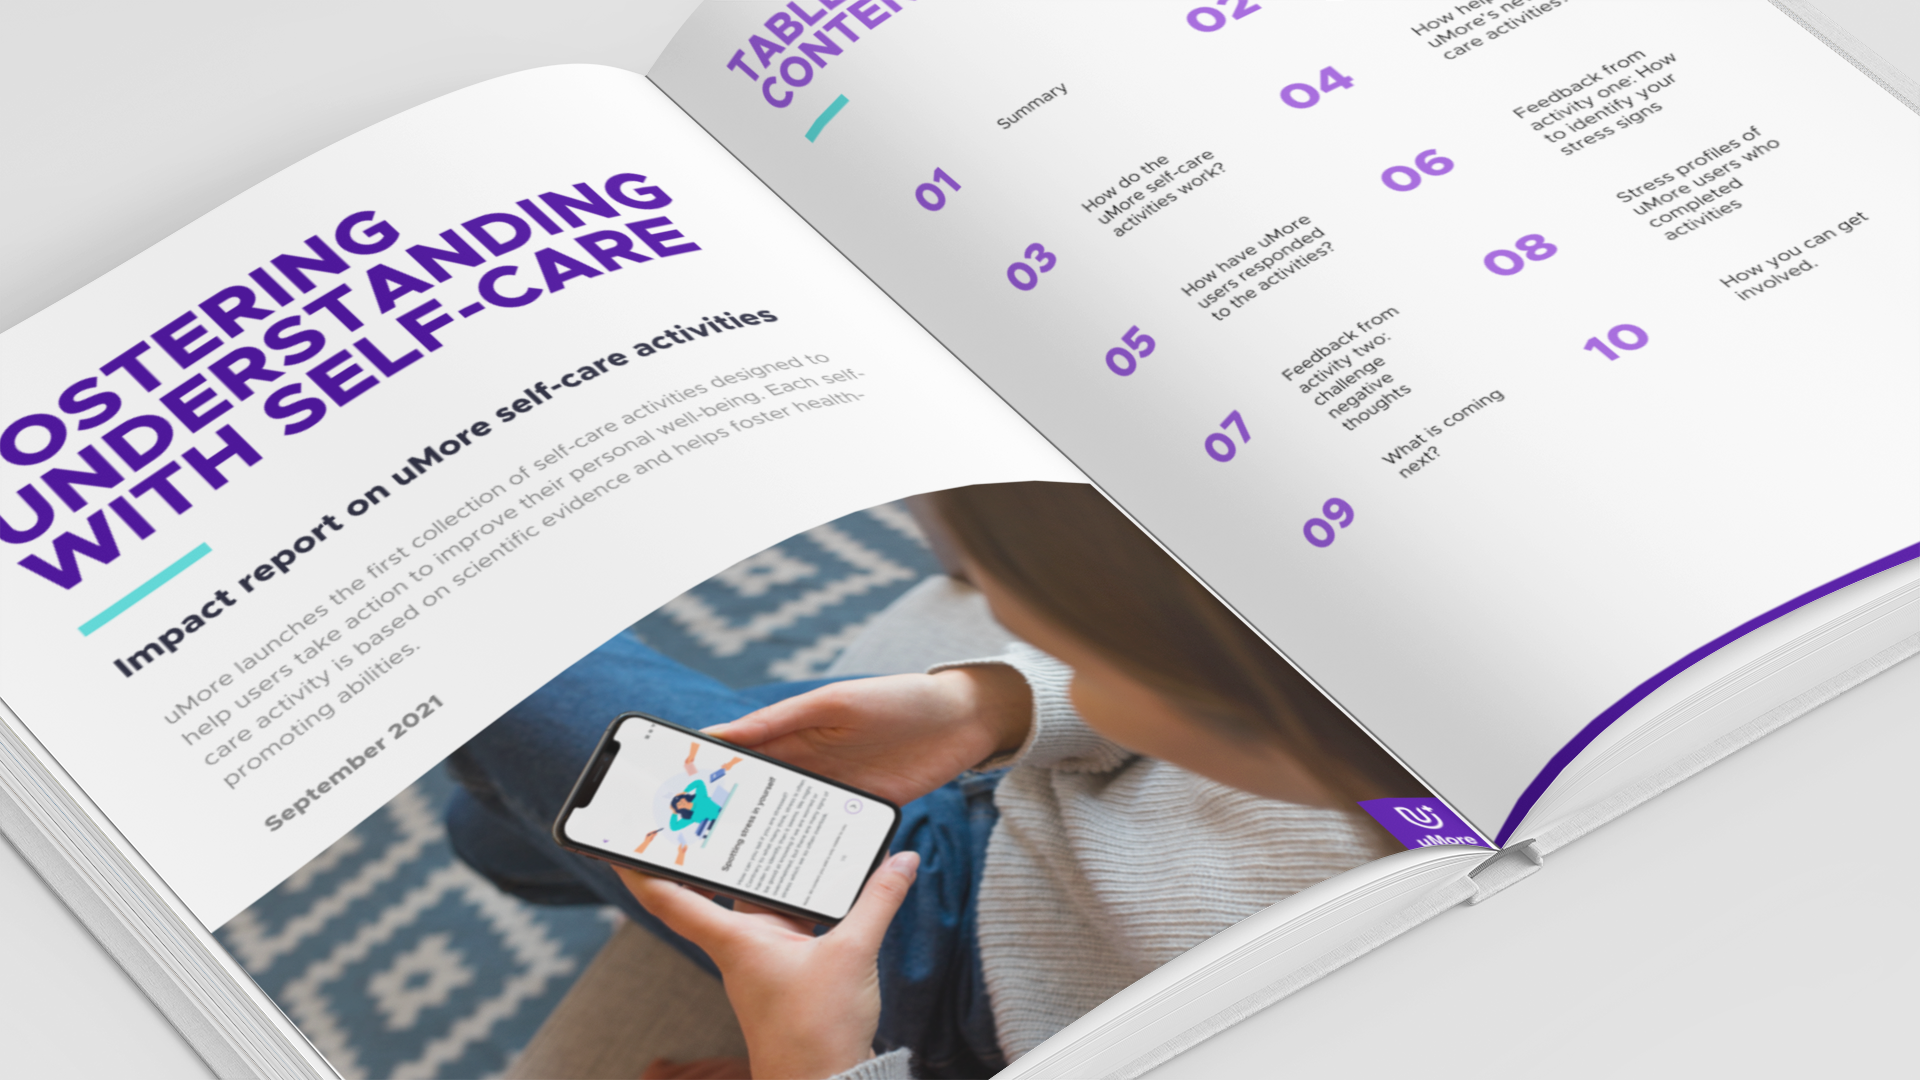 uMore Reveals Its Inaugural Impact Report, with a Resounding 84% Positive Feedback Response